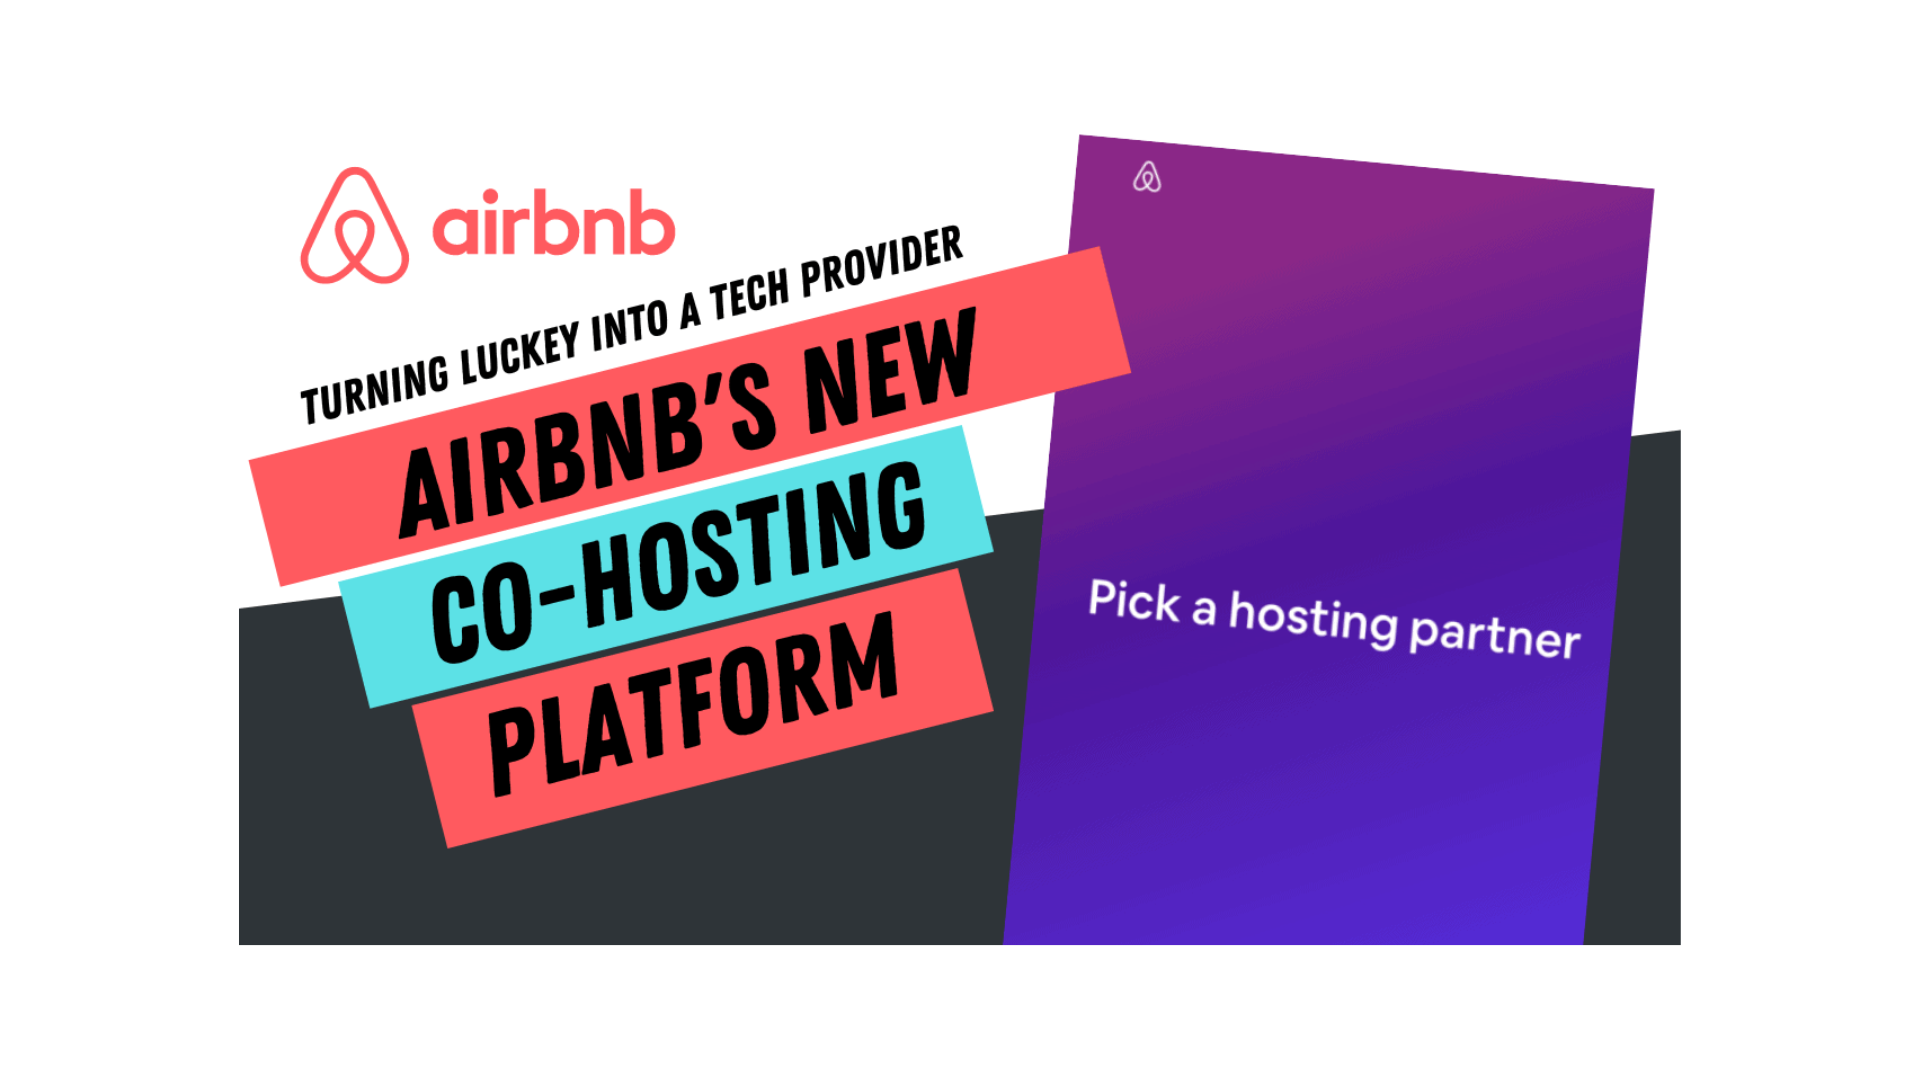 Airbnb’s new co-hosting setting “MORE BOOKINGS”